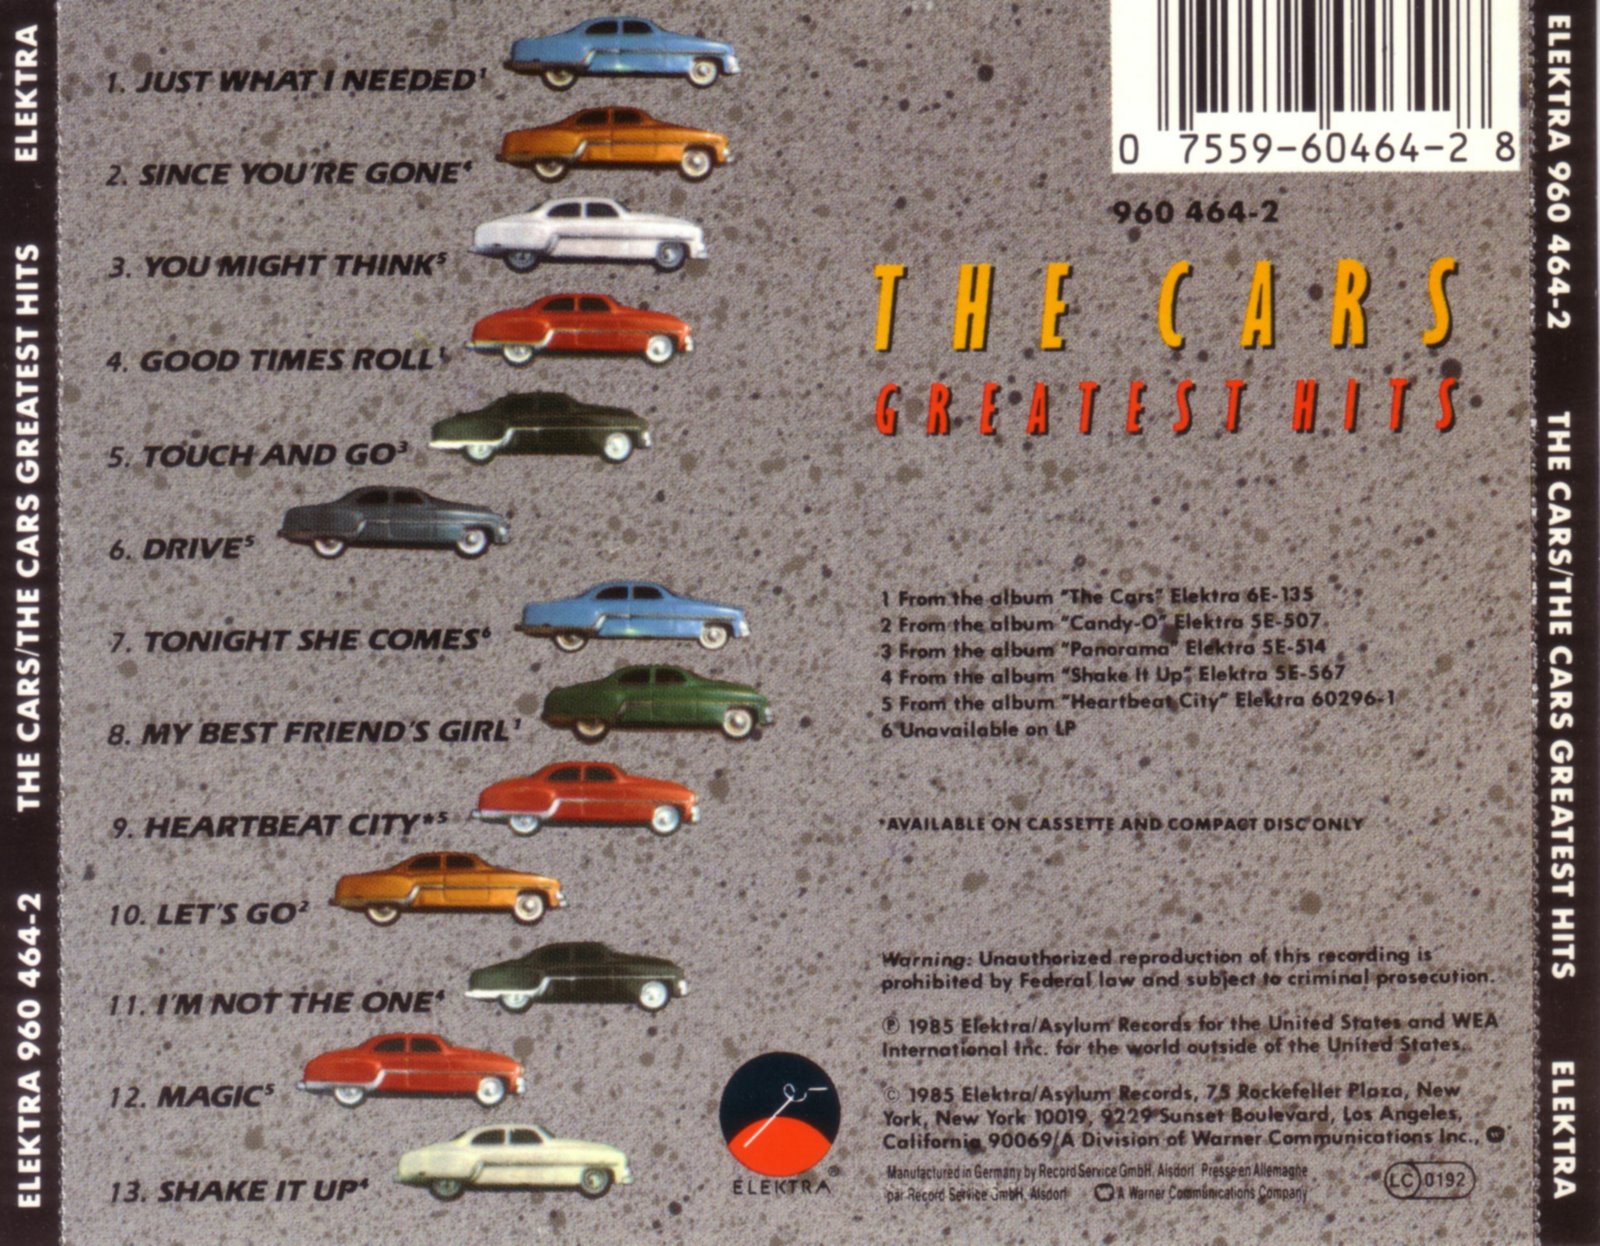 [[AllCDCovers]_the_cars_greatest_hits_2005_retail_cd-back.jpg]